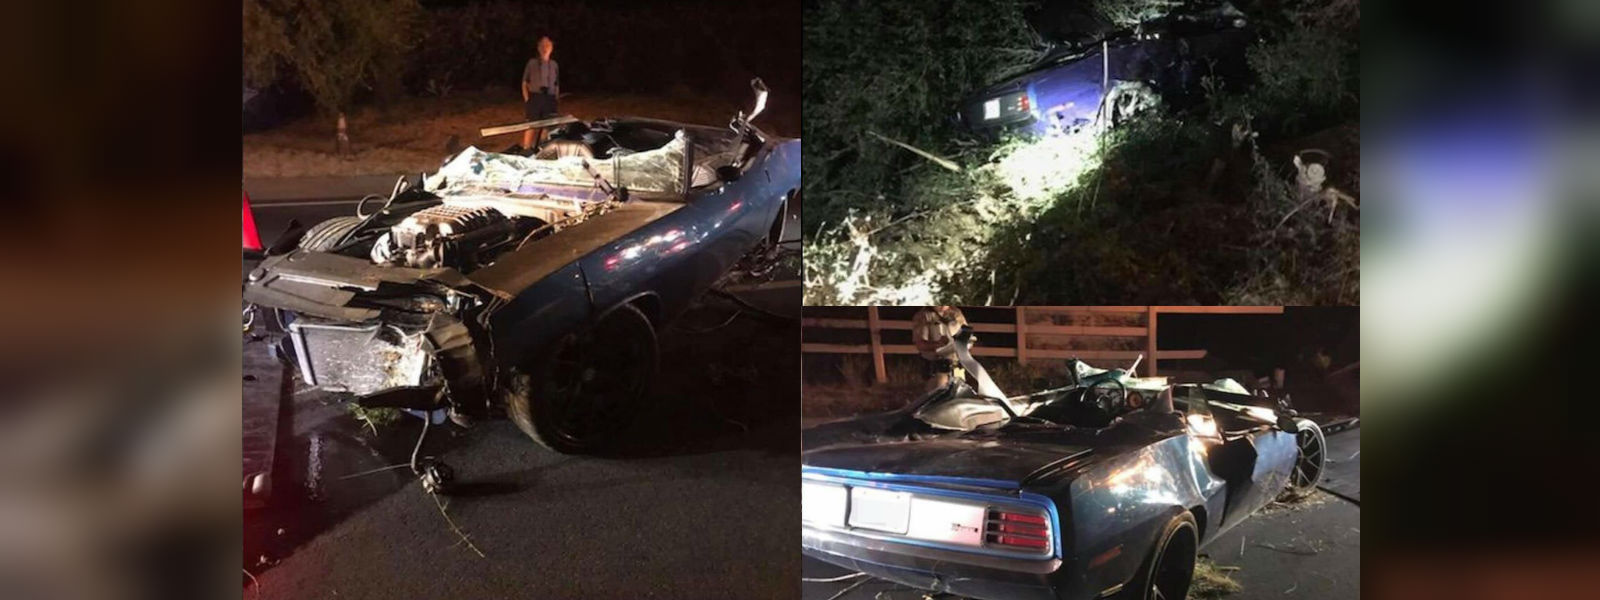 Kevin Hart injured in Los Angeles car accident